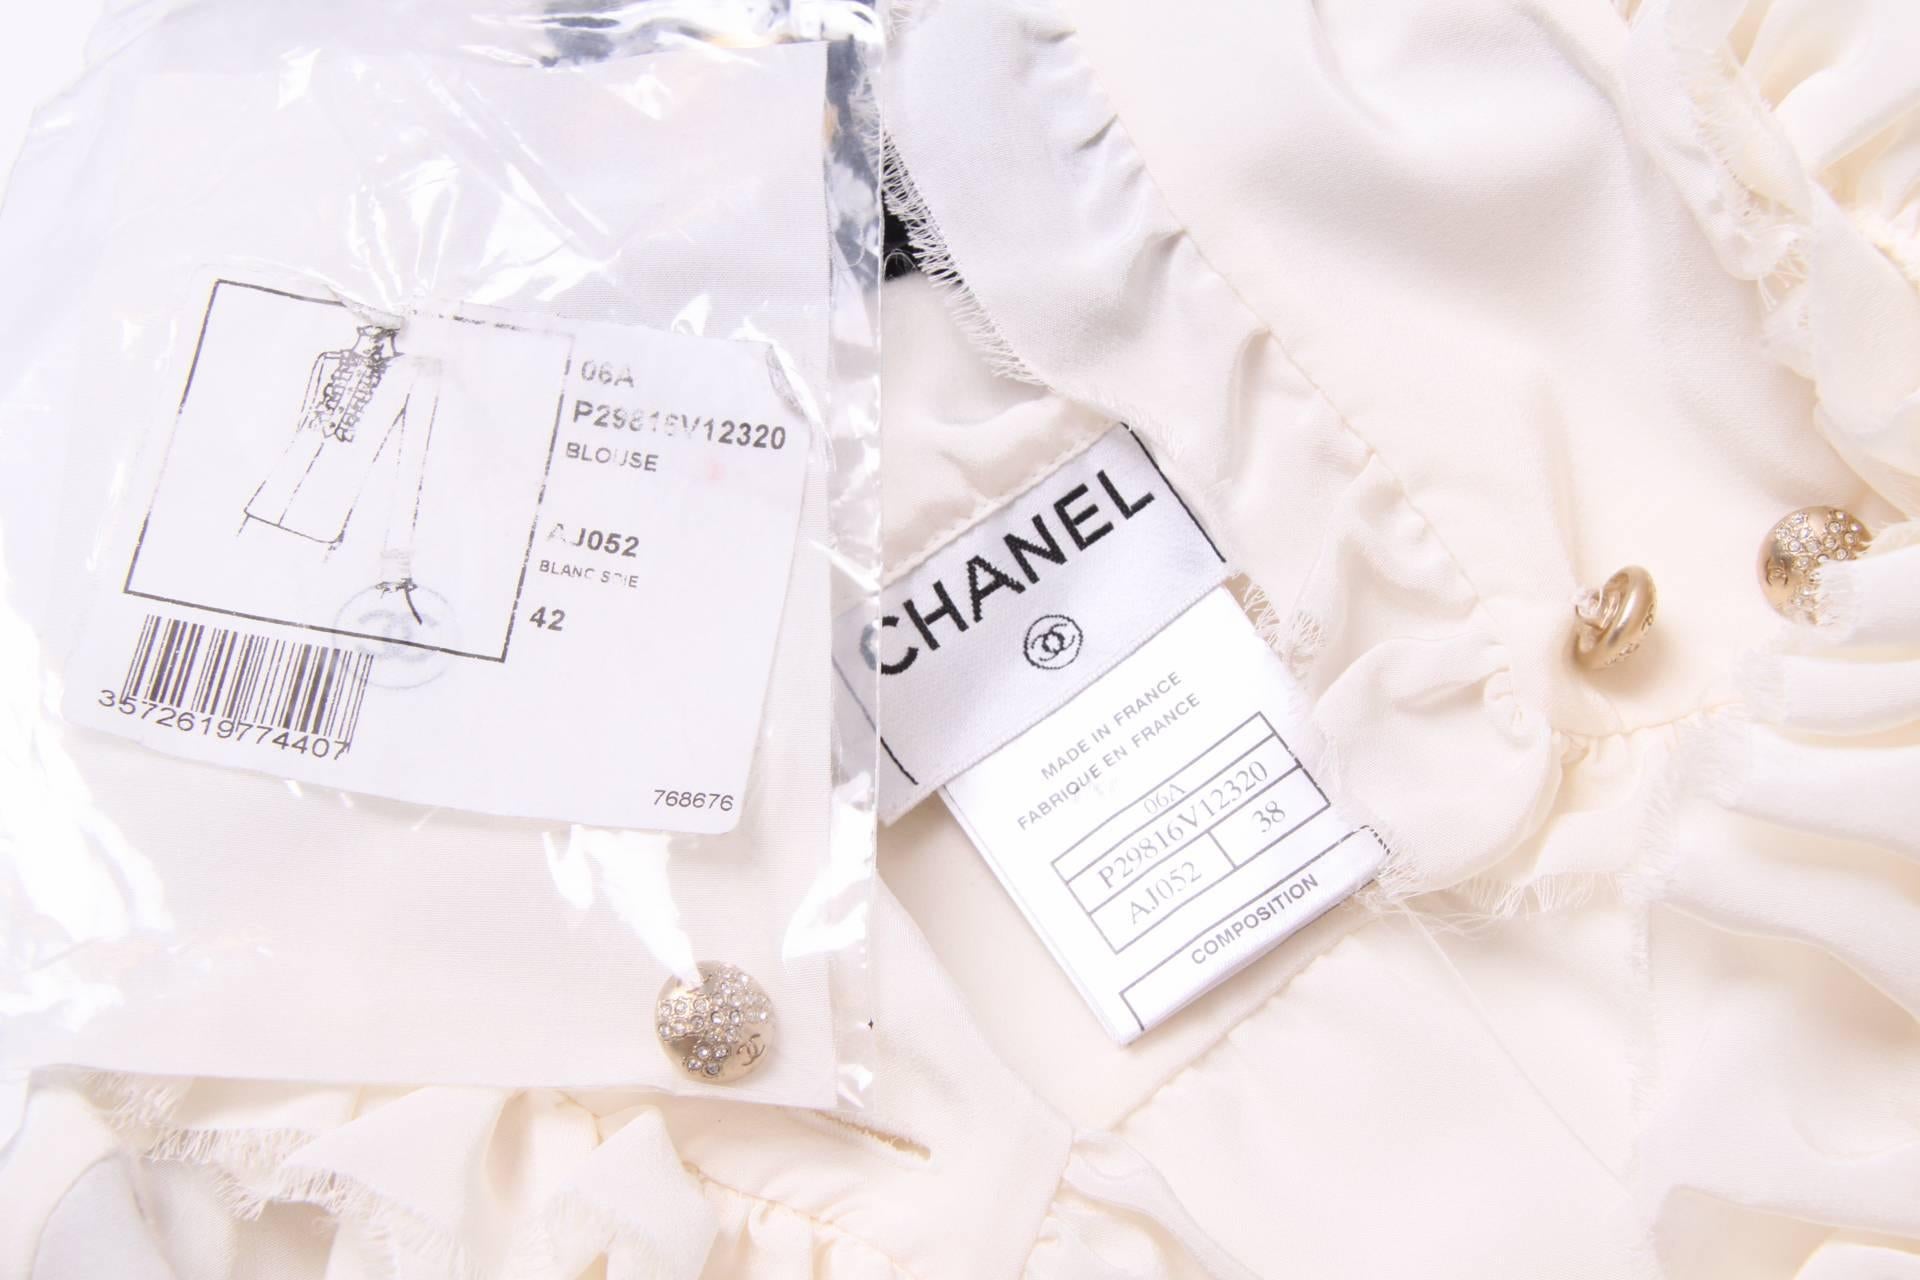 Oh heavenly beauty! Chanel blouse with ruffles... If only!

Made of 100% ivory coloured silk, long sleeves and a mandarin collar. Front closure with six matte gold-tone buttons covered wiht little crystals and a CC logo.

The front panel is slightly